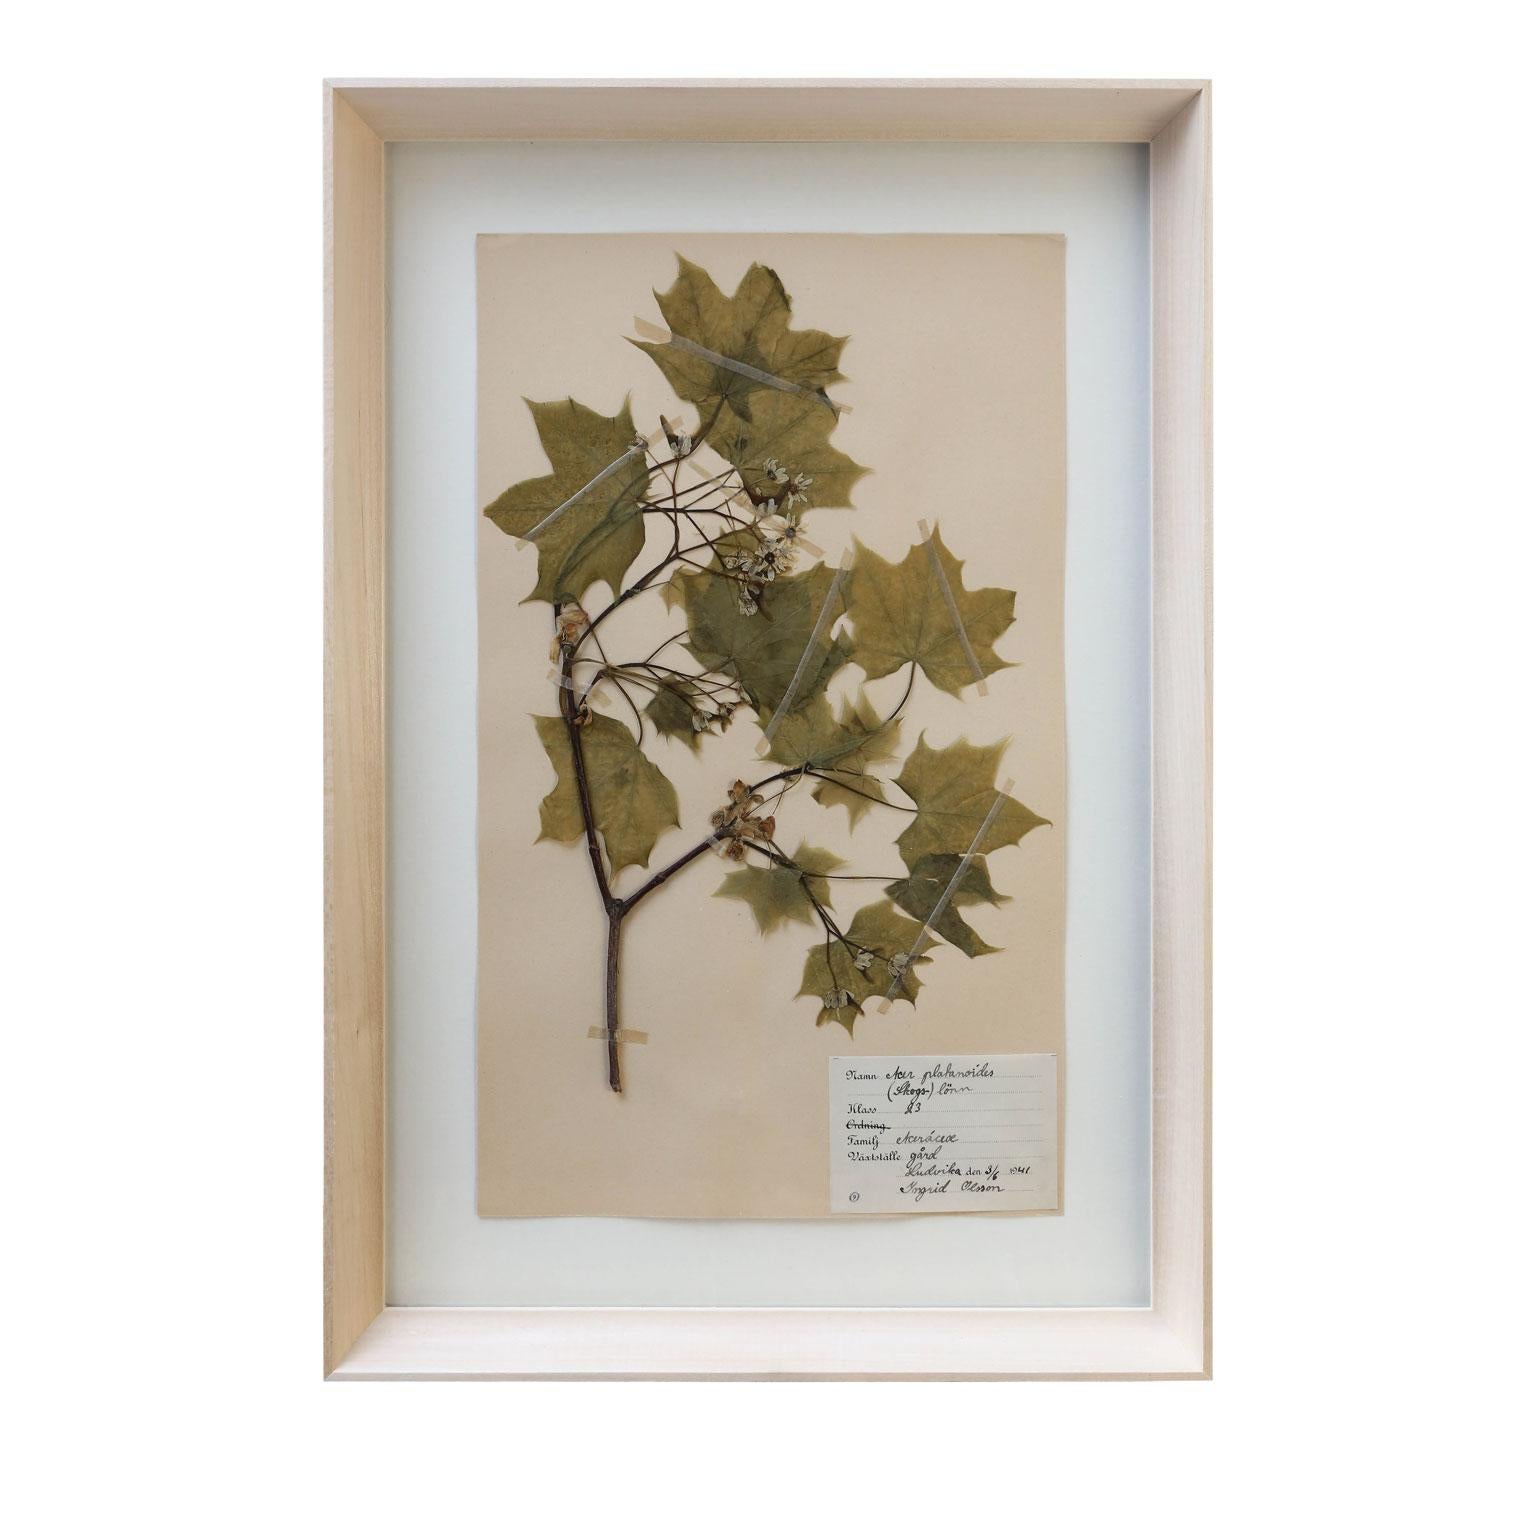 Vintage Swedish herbaria, newly framed in unfinished maple (circa 1930-1950). Each float-mounted herbarium (botanical) measures 15.75 inches high x 9.5 inches wide. Sold individually and priced $695 each. Twenty available - see all five listings